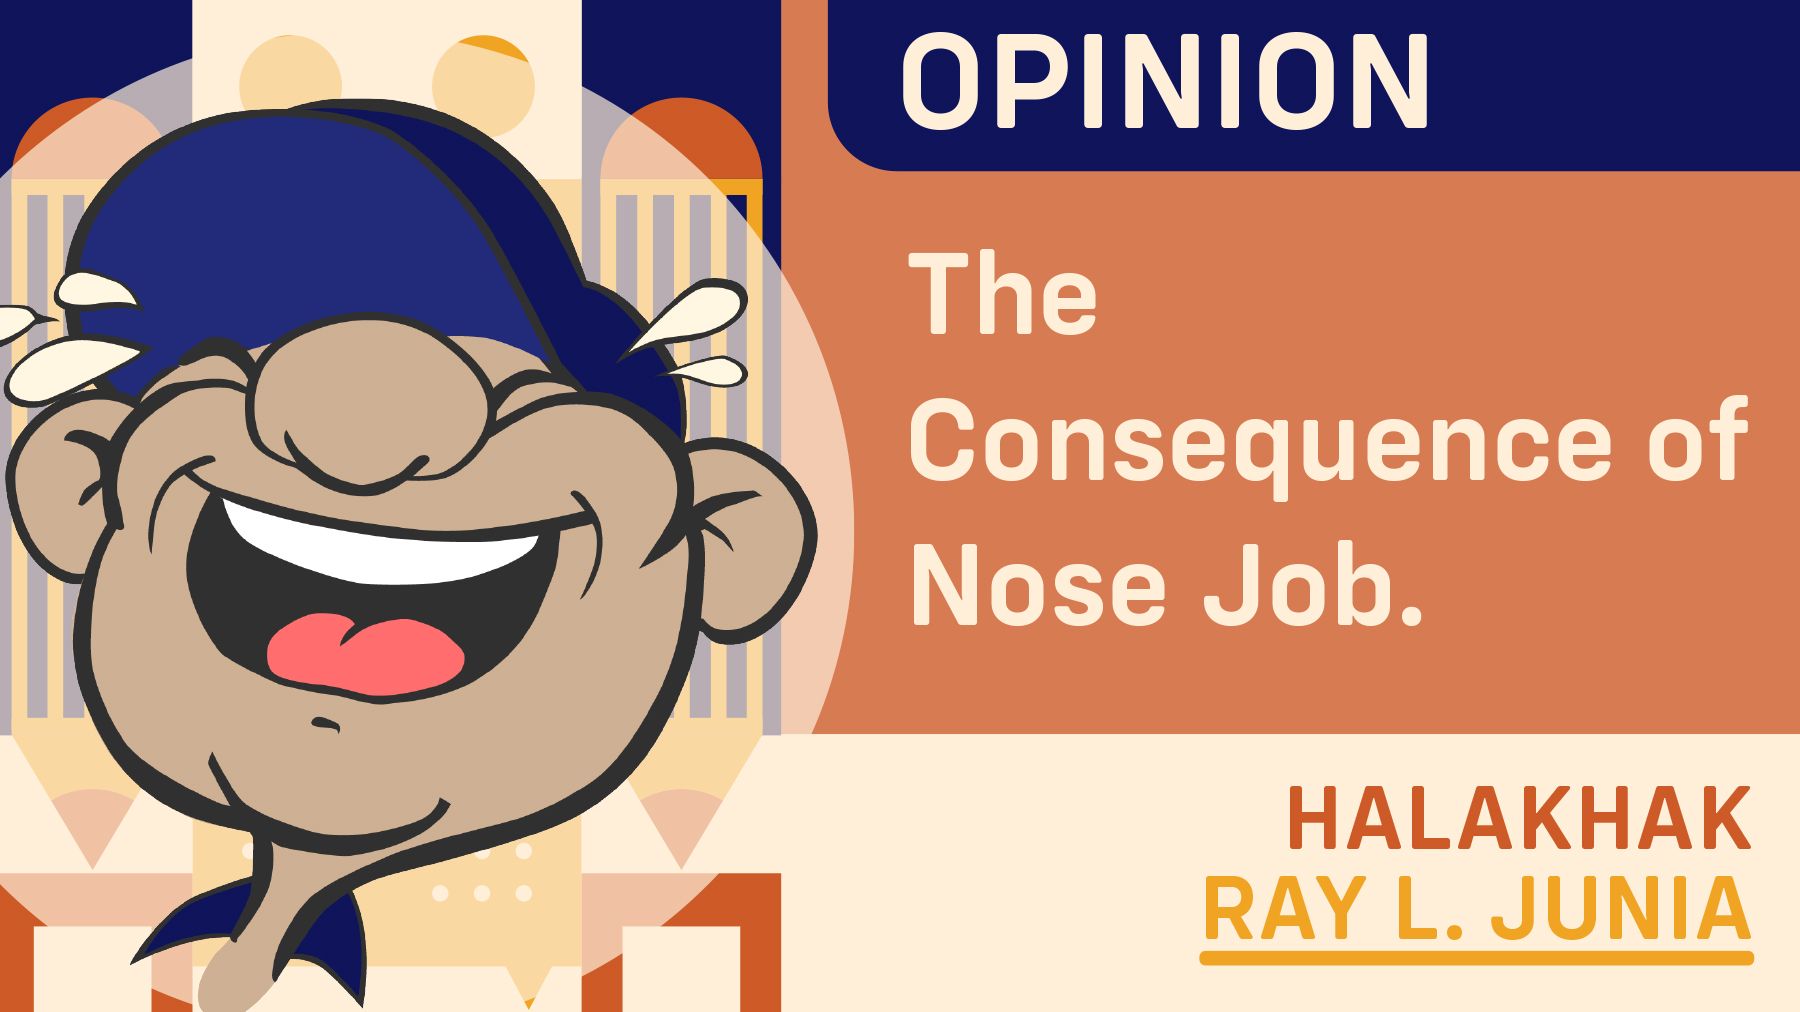 The Consequence of Nose Job